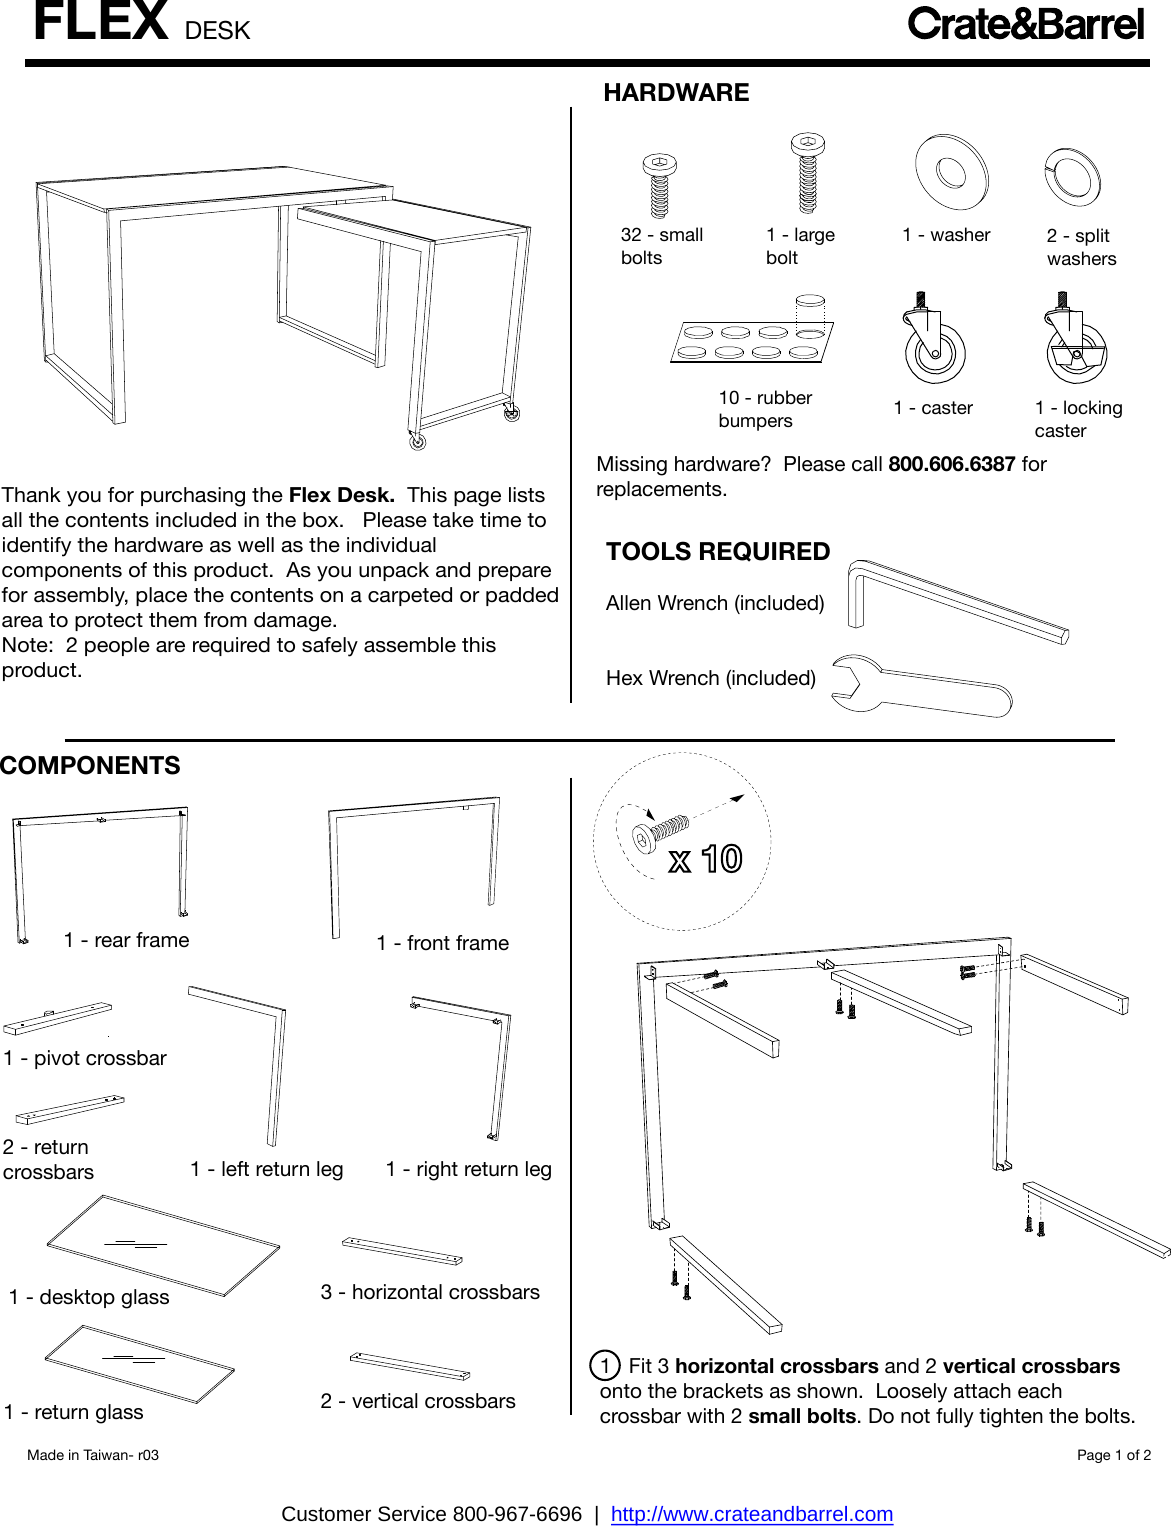 Page 1 of 2 - Crate-Barrel 475-Flex-Desk Flex Desk Assembly Instructions From Crate And Barrel